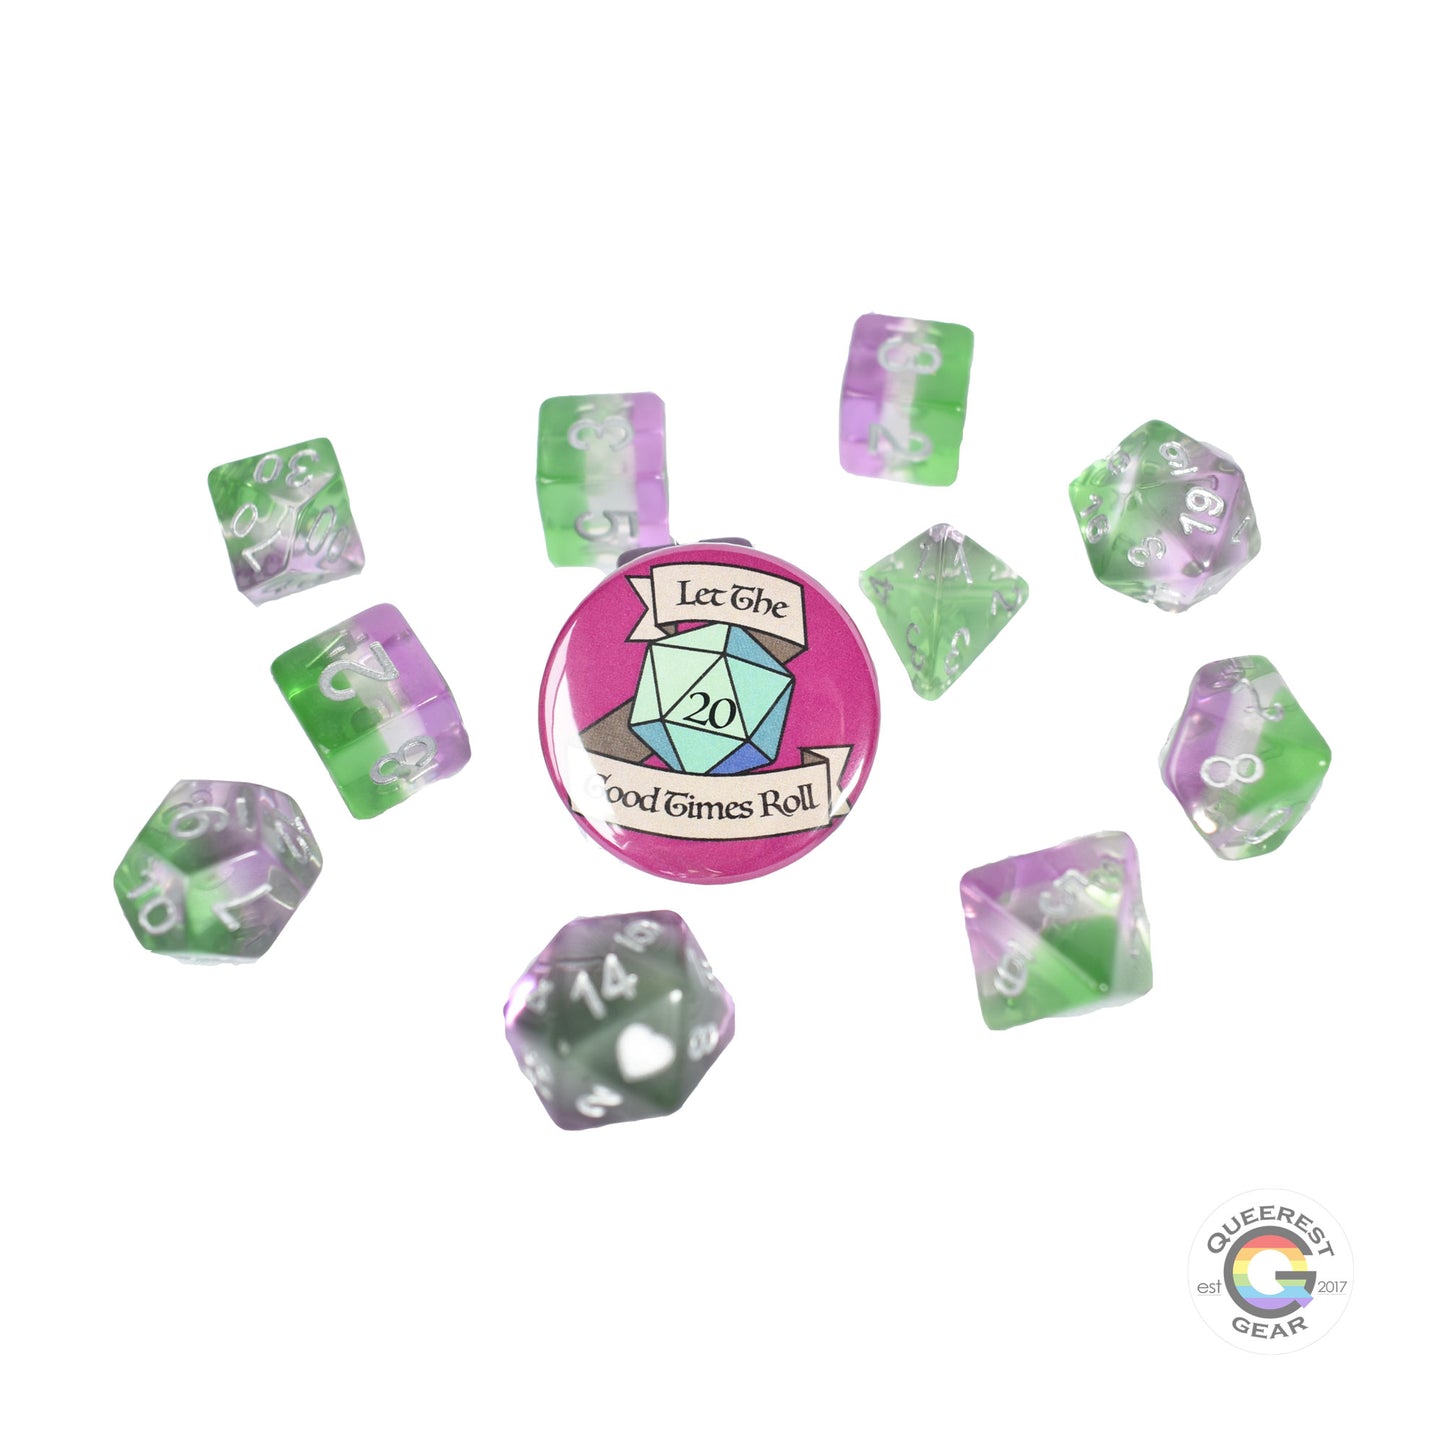 11 piece set of polyhedral dice scattered on a white background. They are transparent and colored in the stripes of the genderqueer flag with silver ink. There is the freebie “let the good times roll” pinback button among them. 